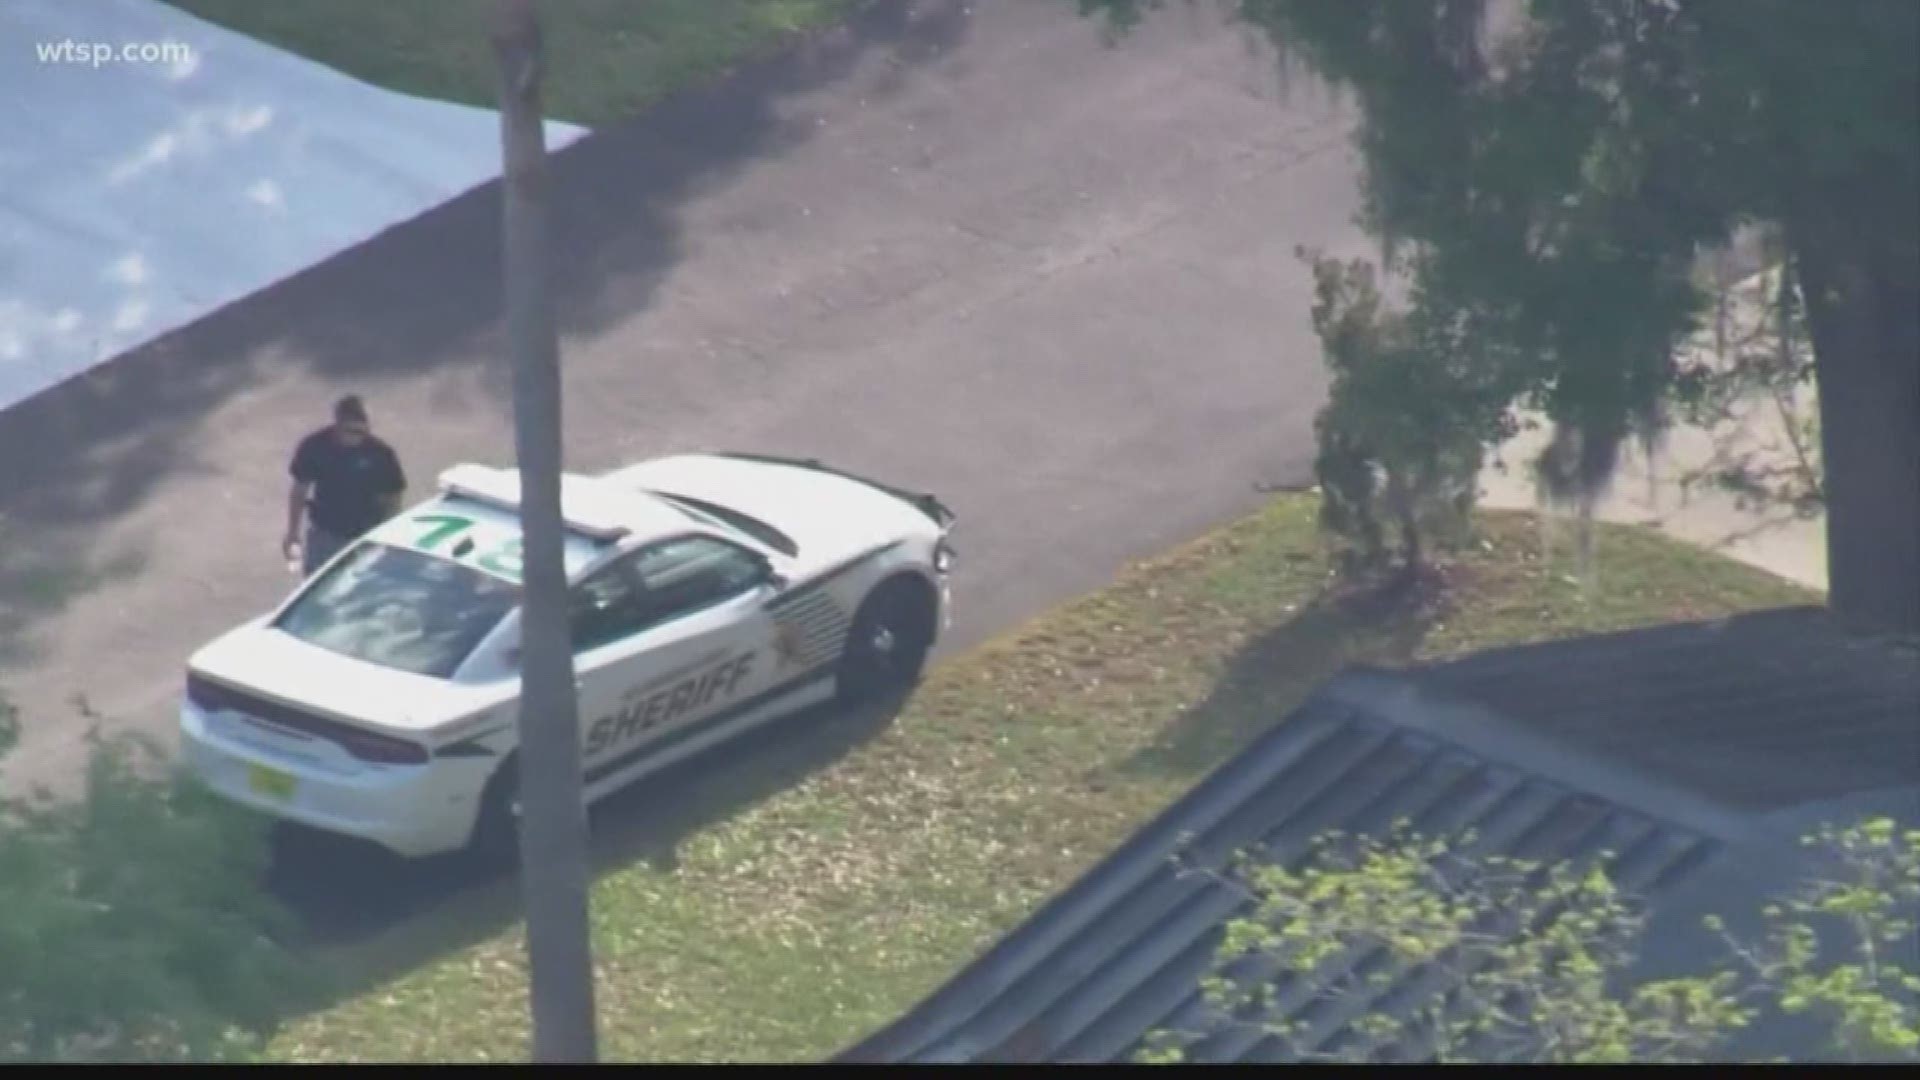 Hillsborough County deputies are investigating a murder-suicide in Plant City. 

Law enforcement said they responded to the Magnolia Hill 55+ community around 3 p.m. Friday after getting a vague 911 call.